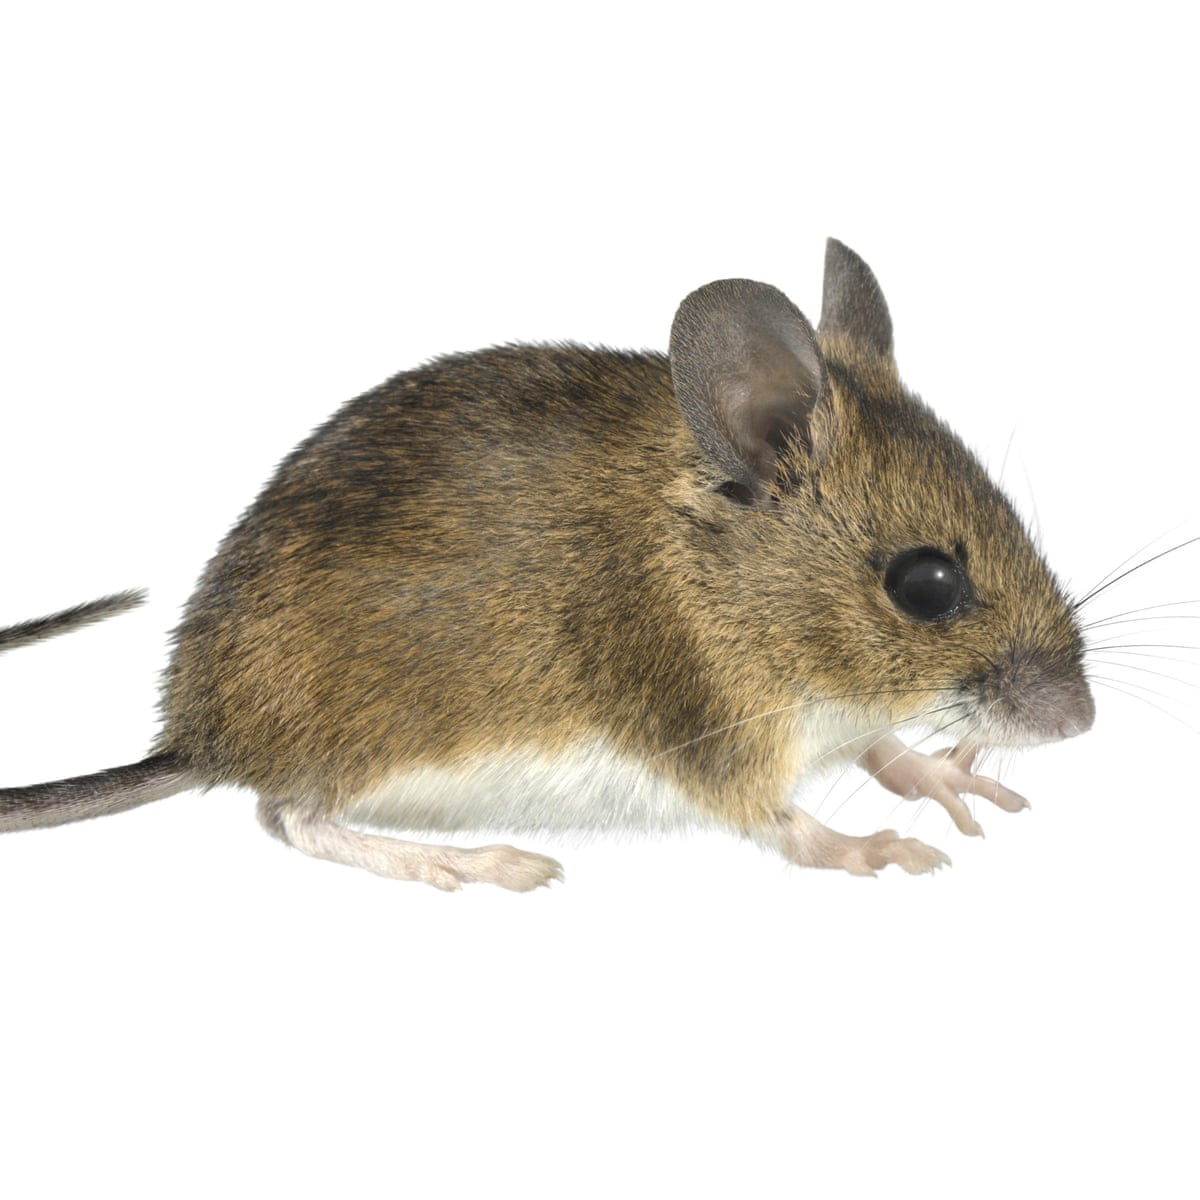 Why do mice have such long tails? | Animals | The Guardian